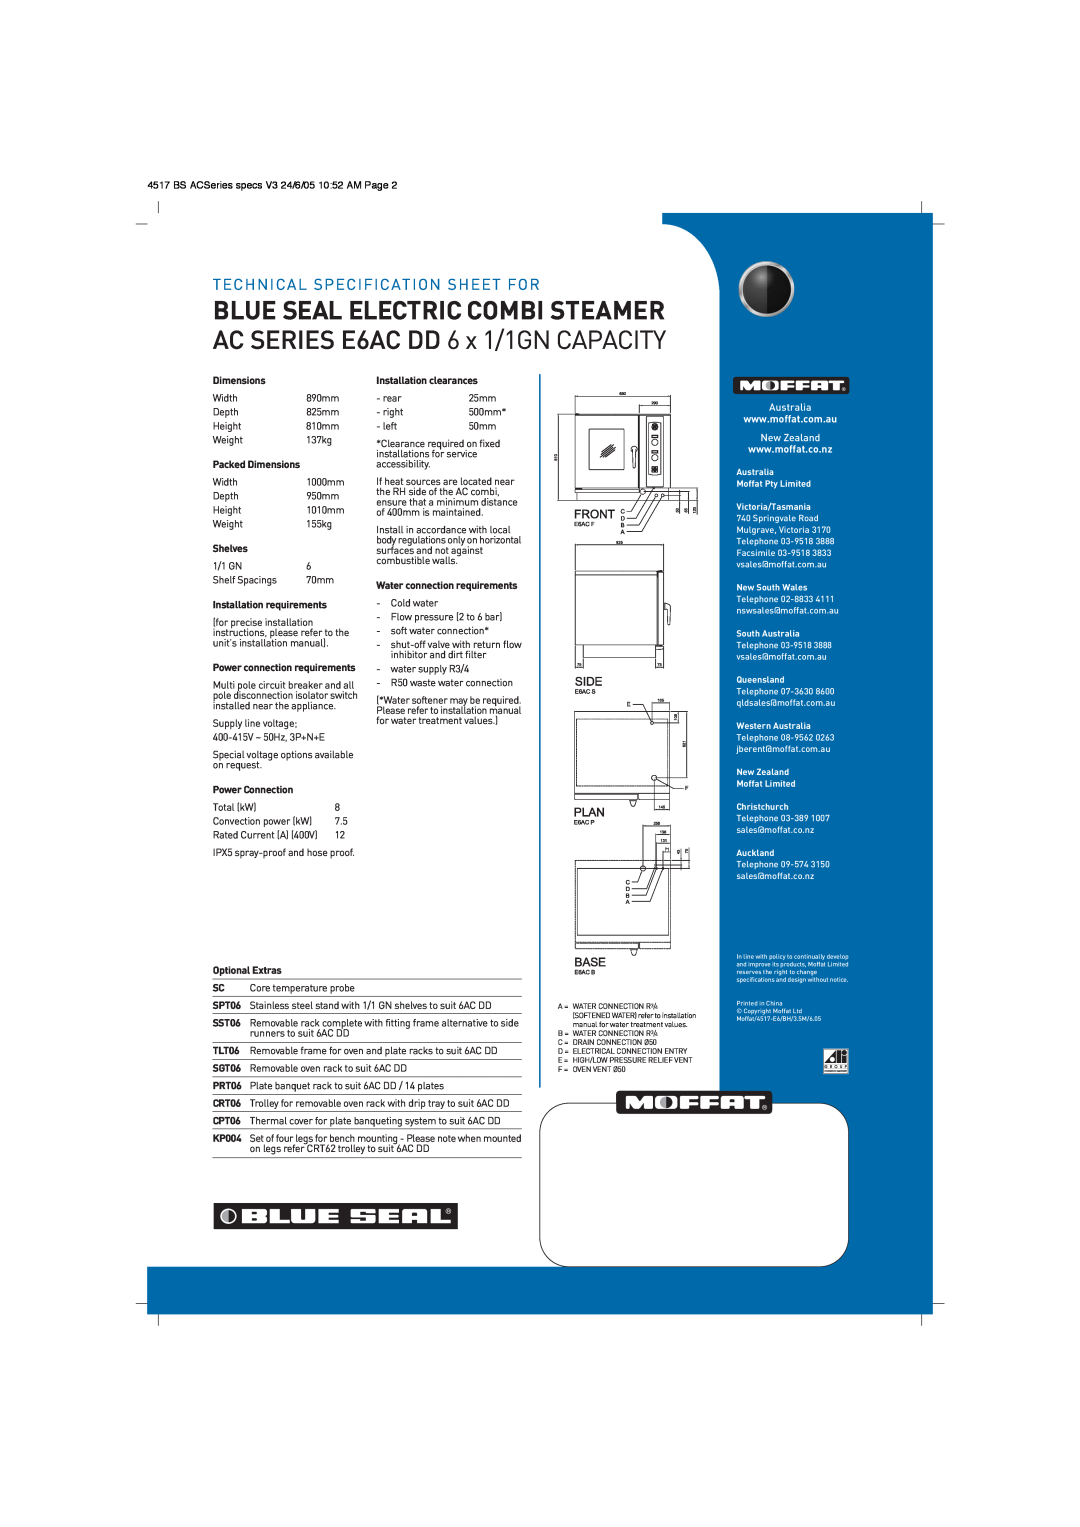 Moffat Blue Seal Electric Combi Steamer, AC SERIES E6AC DD 6 x 1/1GN CAPACITY, Technical Specification Sheet For 